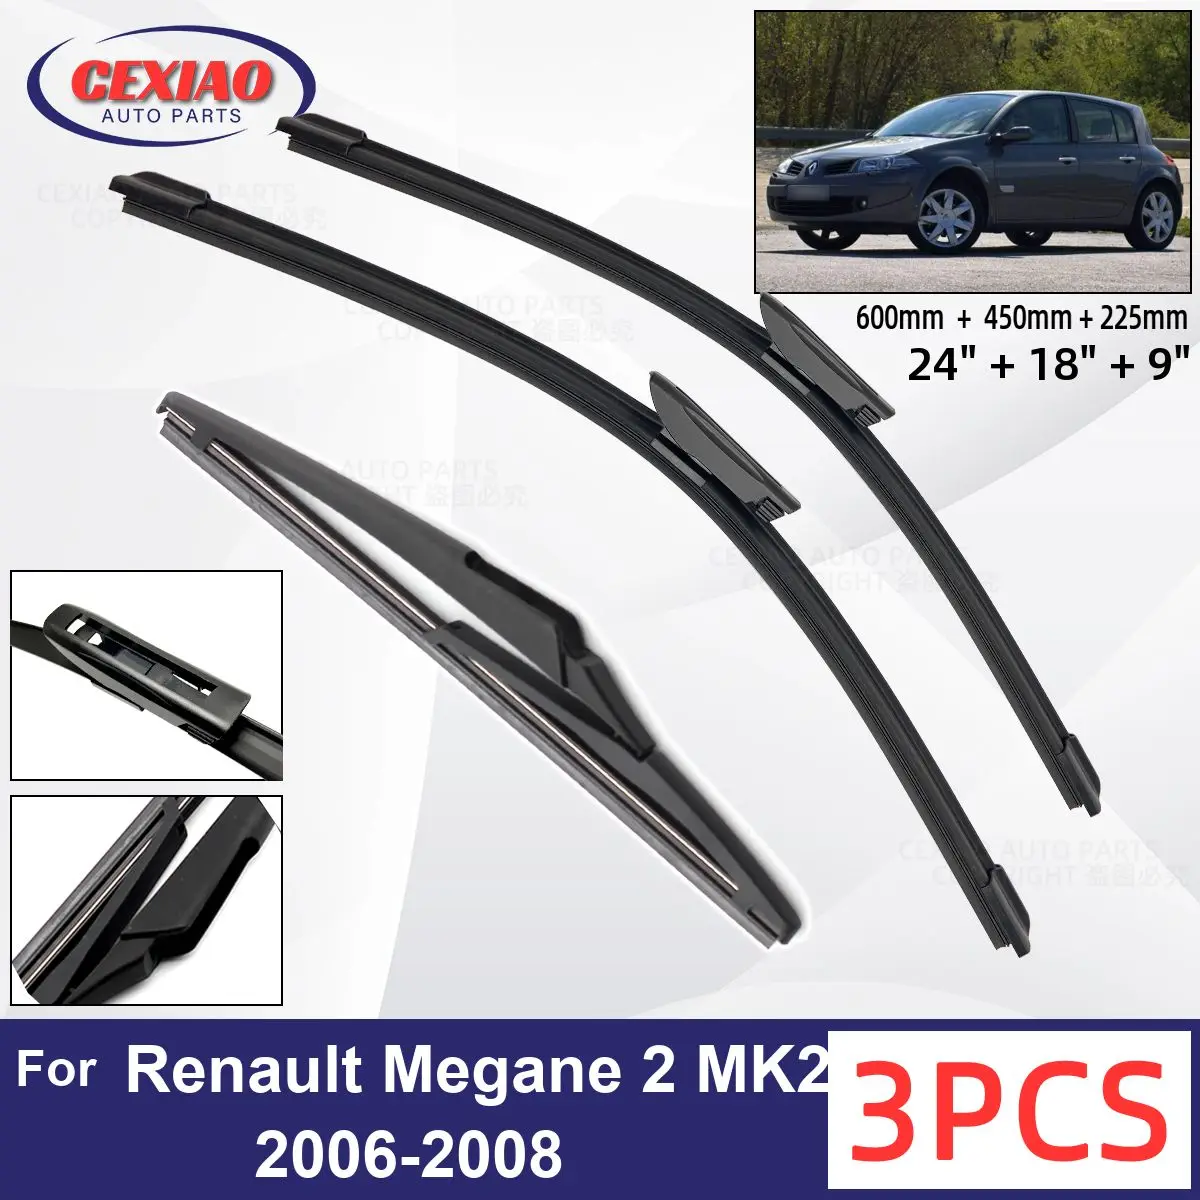 

For Renault Megane 2 MK2 2006-2008 Car Front Rear Wiper Blades Soft Rubber Windscreen Wipers Auto Windshield 24"18"9" 2006 2007